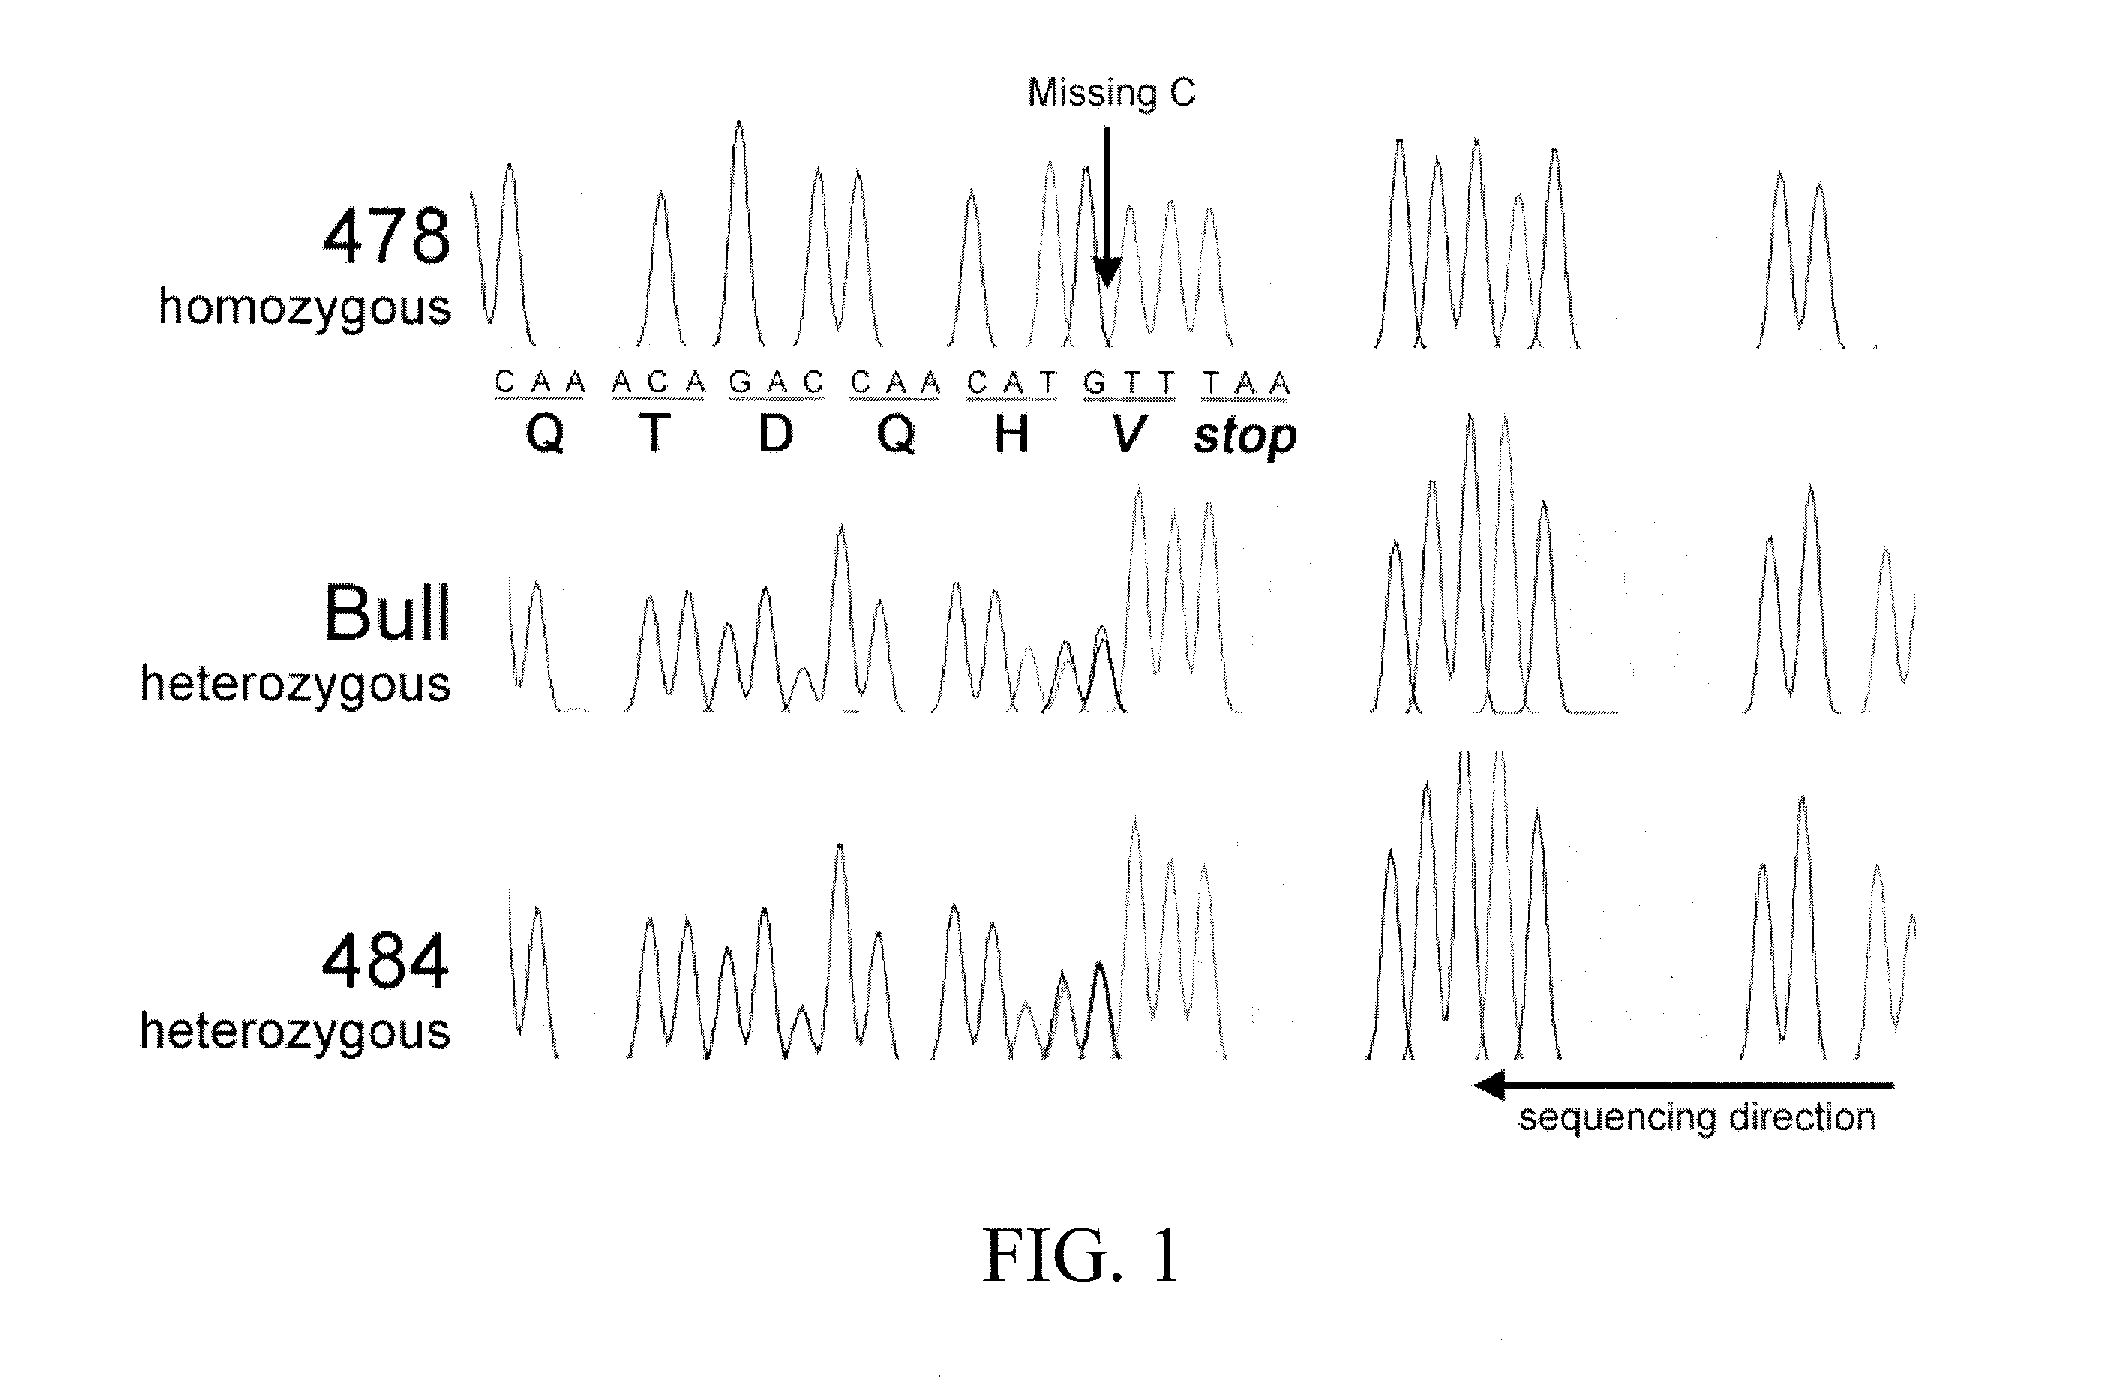 Materials and Methods for Producing Animals With Short Hair